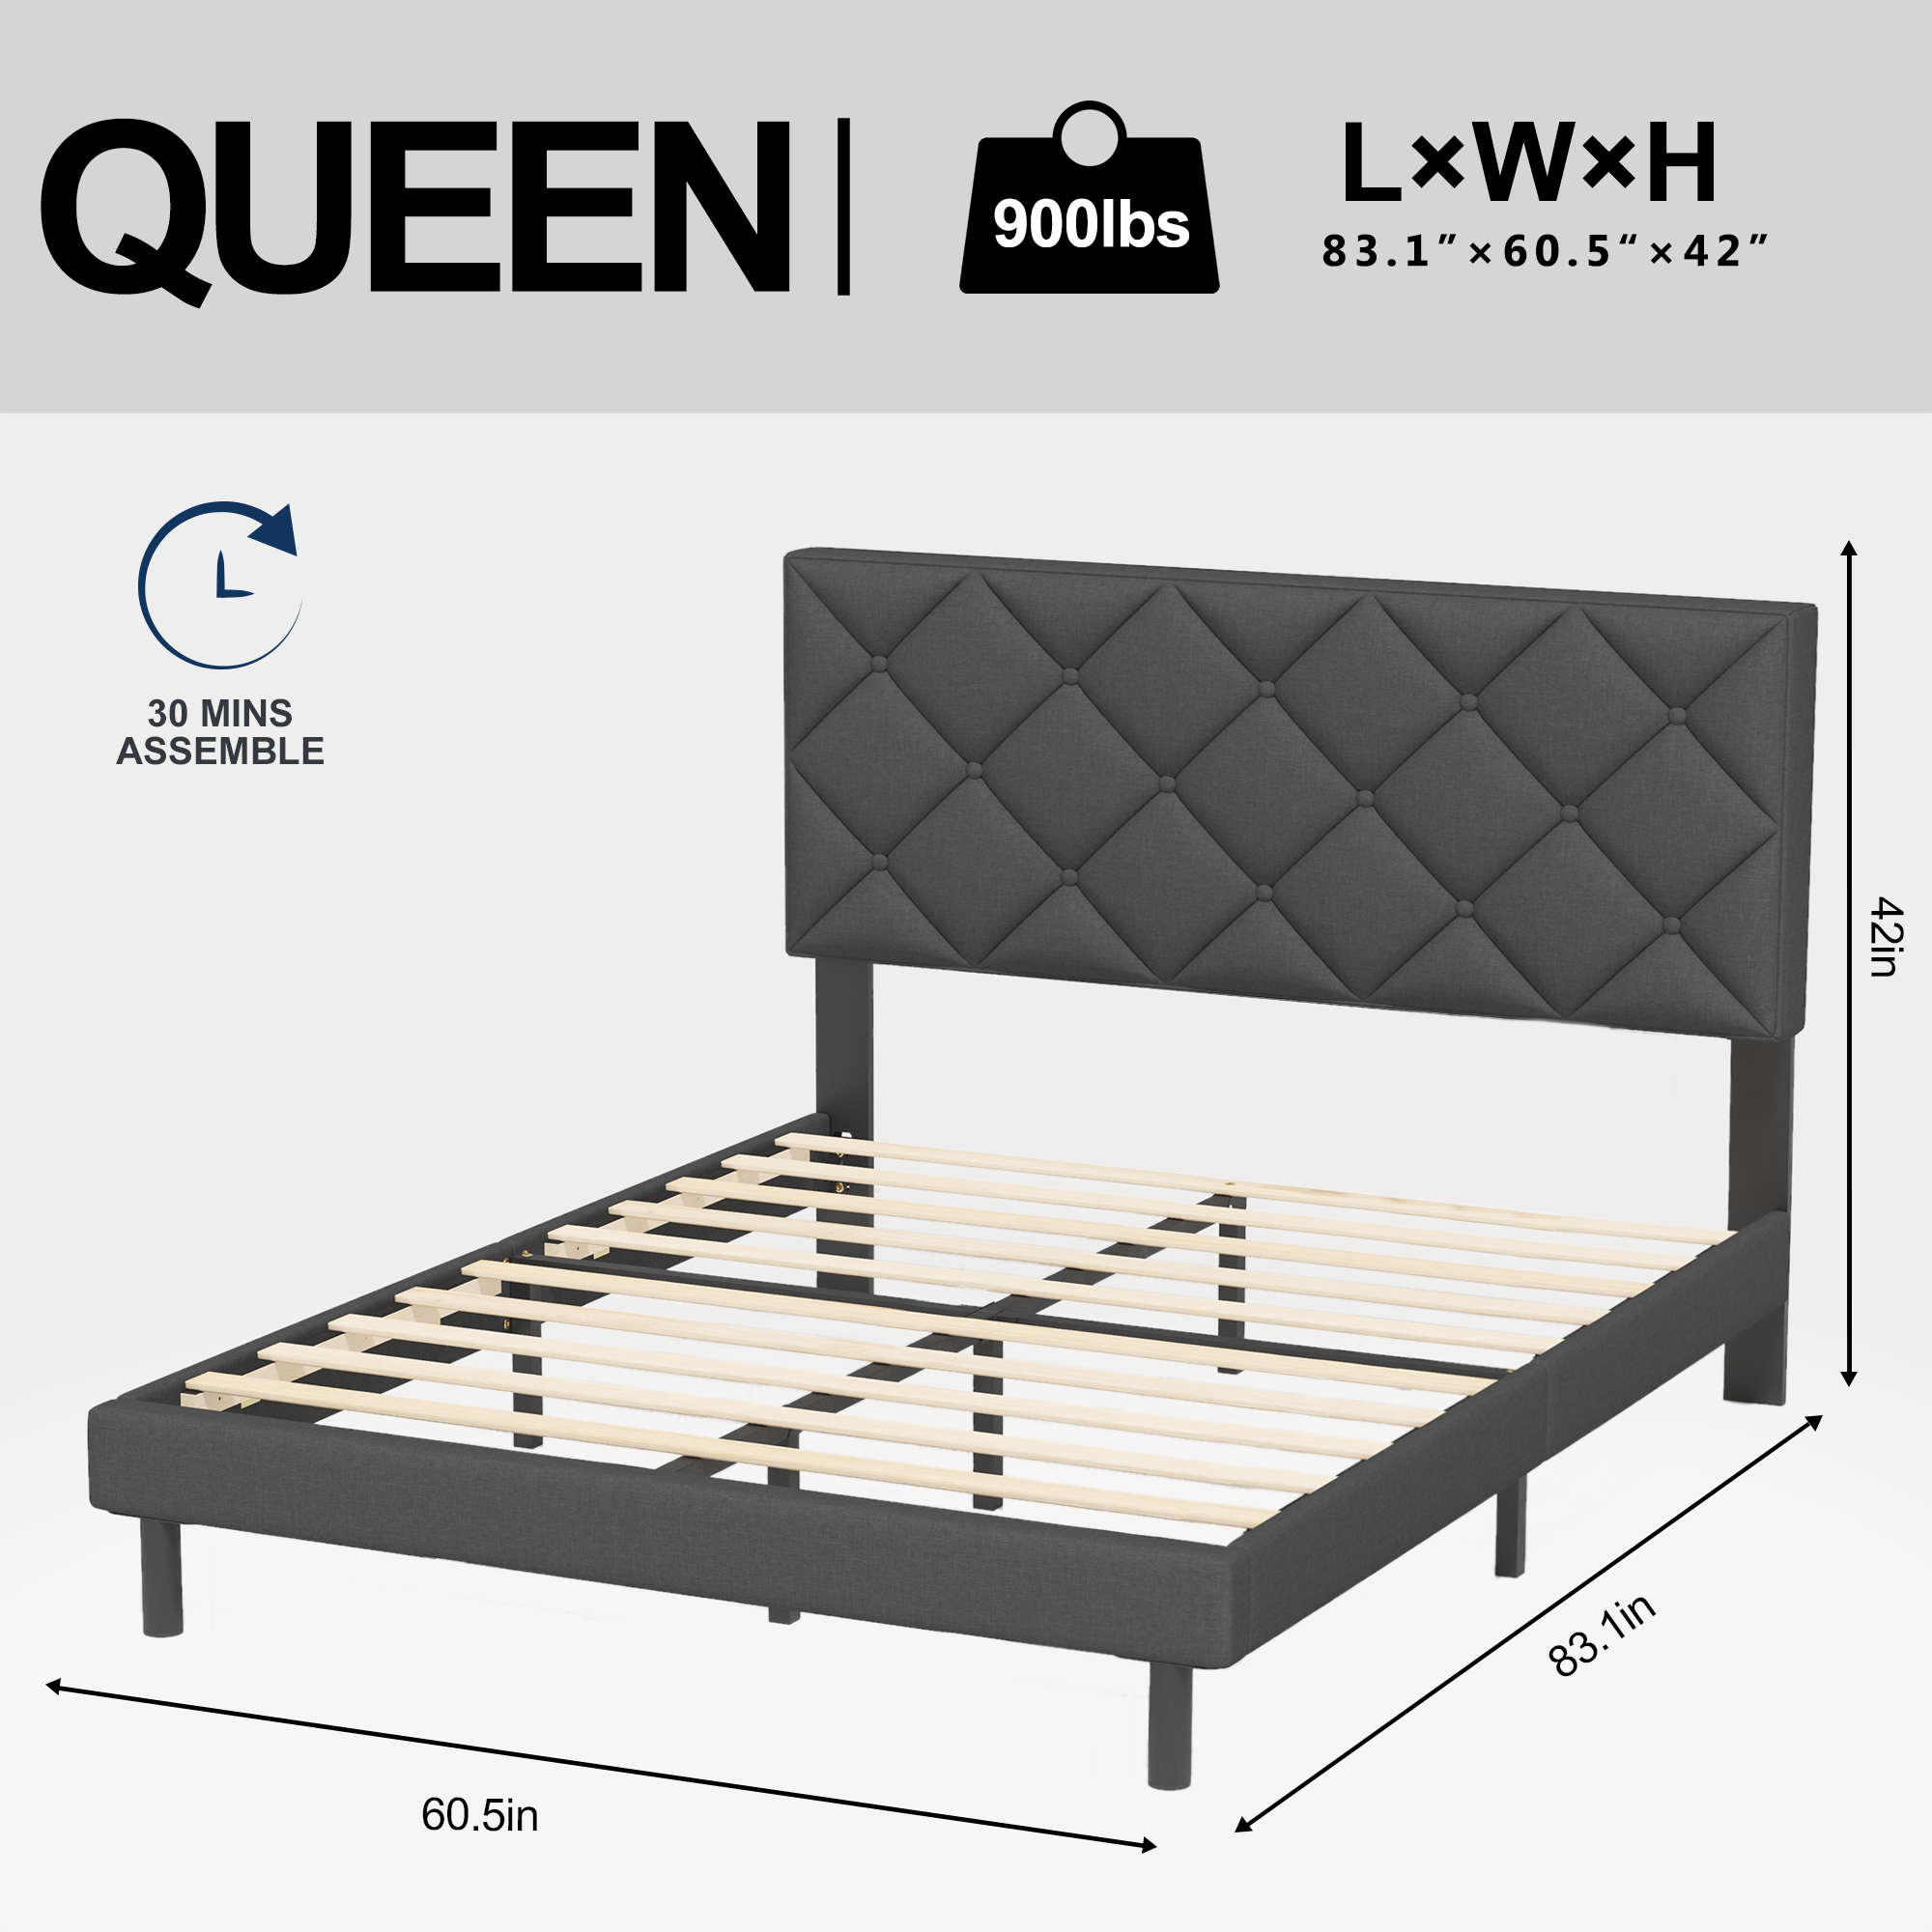 Queen Bed, HAIIDE Queen Size bed Frame with Fabric Upholstered Headboard,Dark Grey, Easy Assembly - image 4 of 7